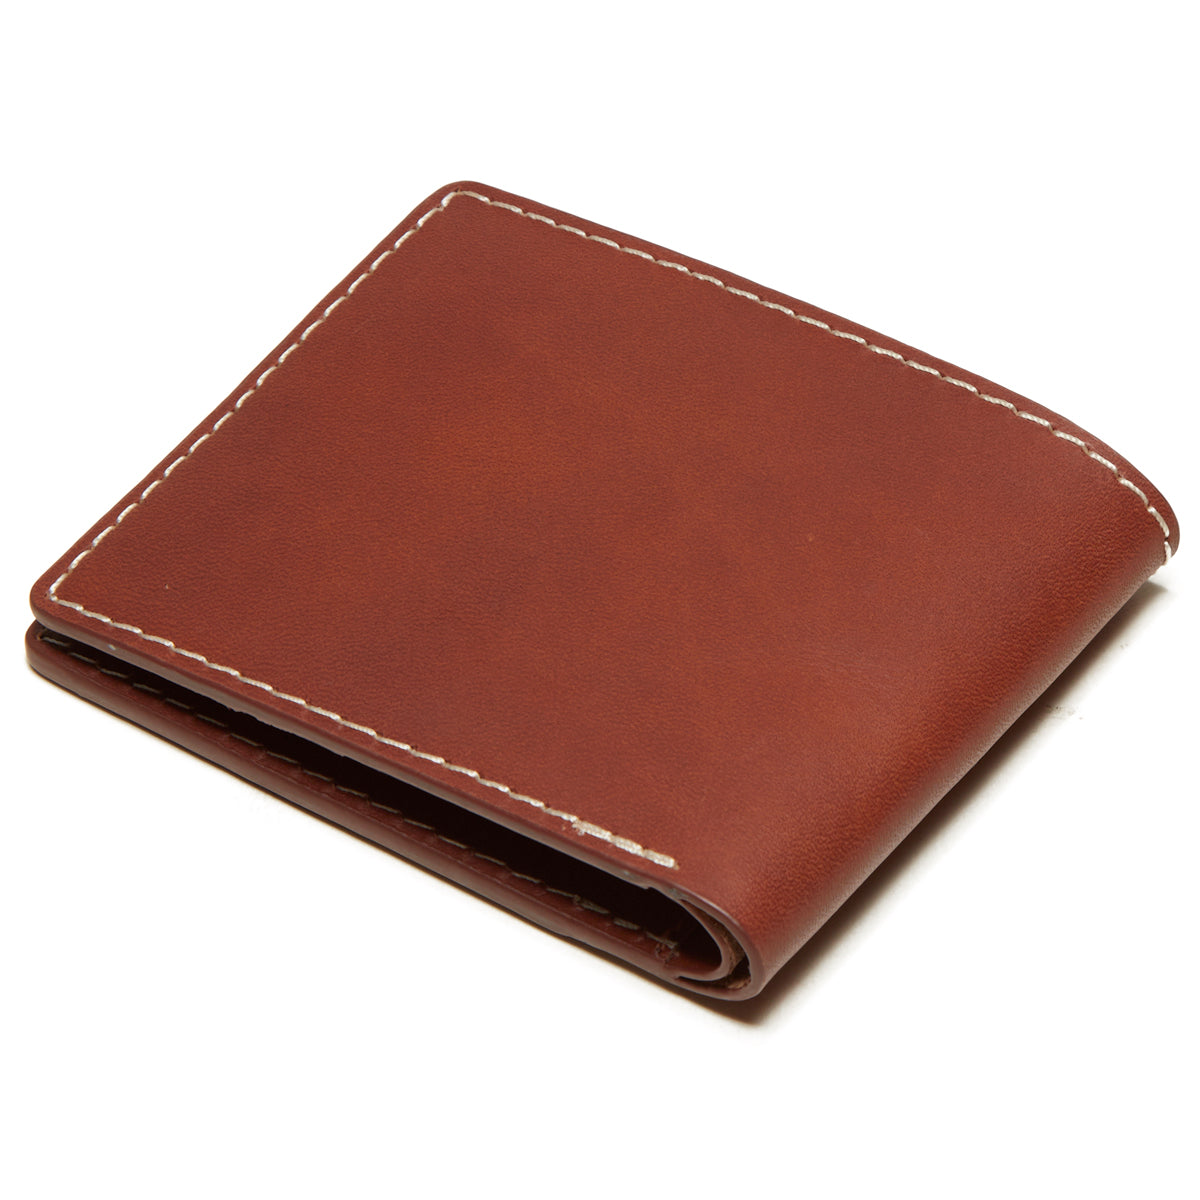 Brixton Traditional Leather Wallet - Brown image 3